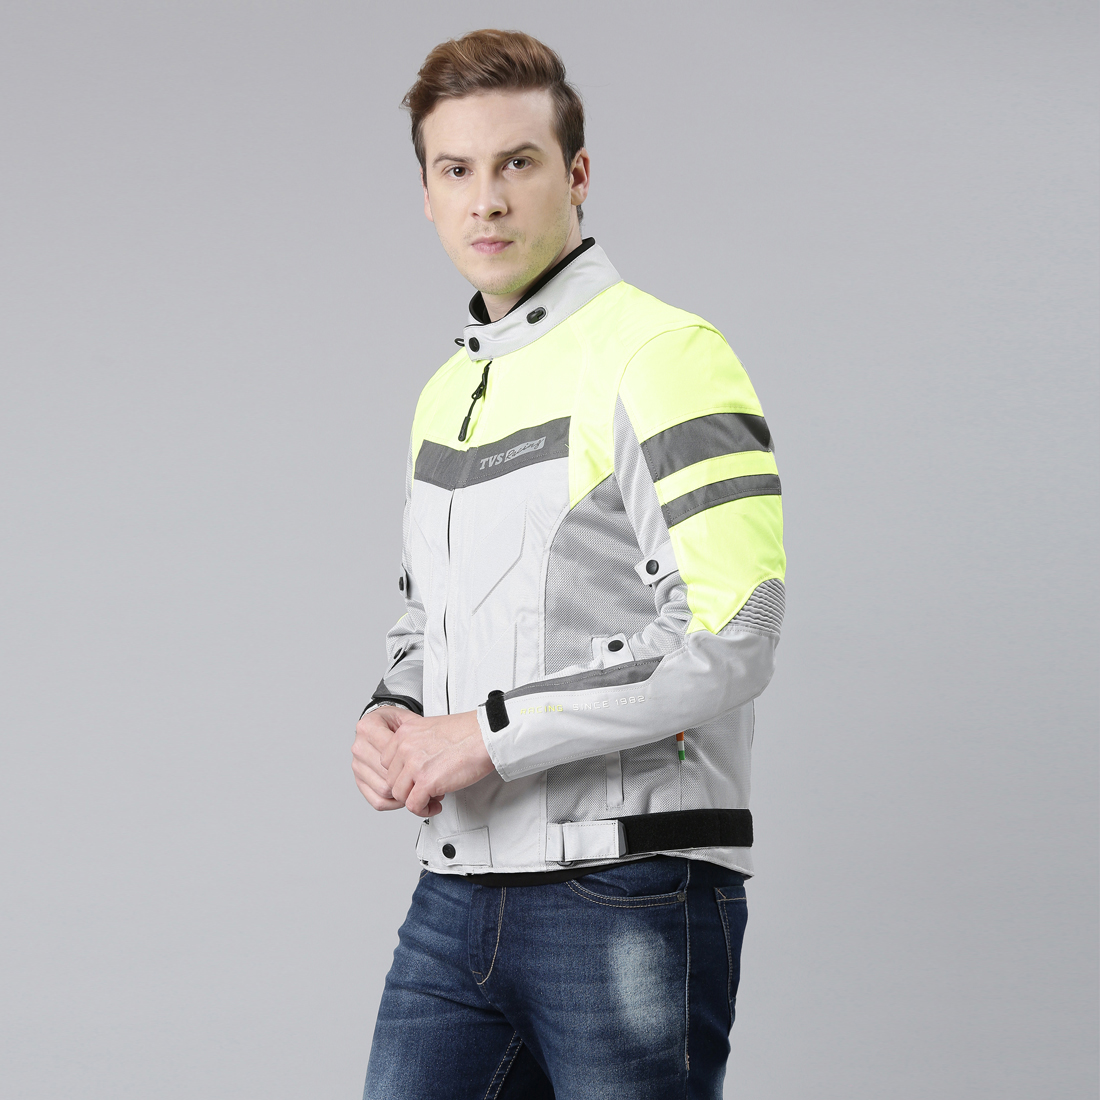  TVS Racing Aegis 3-Layer Riding Jacket for Men- All Weather Adaptability, CE Level 2 Armour Protection – Premium Bike Jackets for Bikers (Neon)